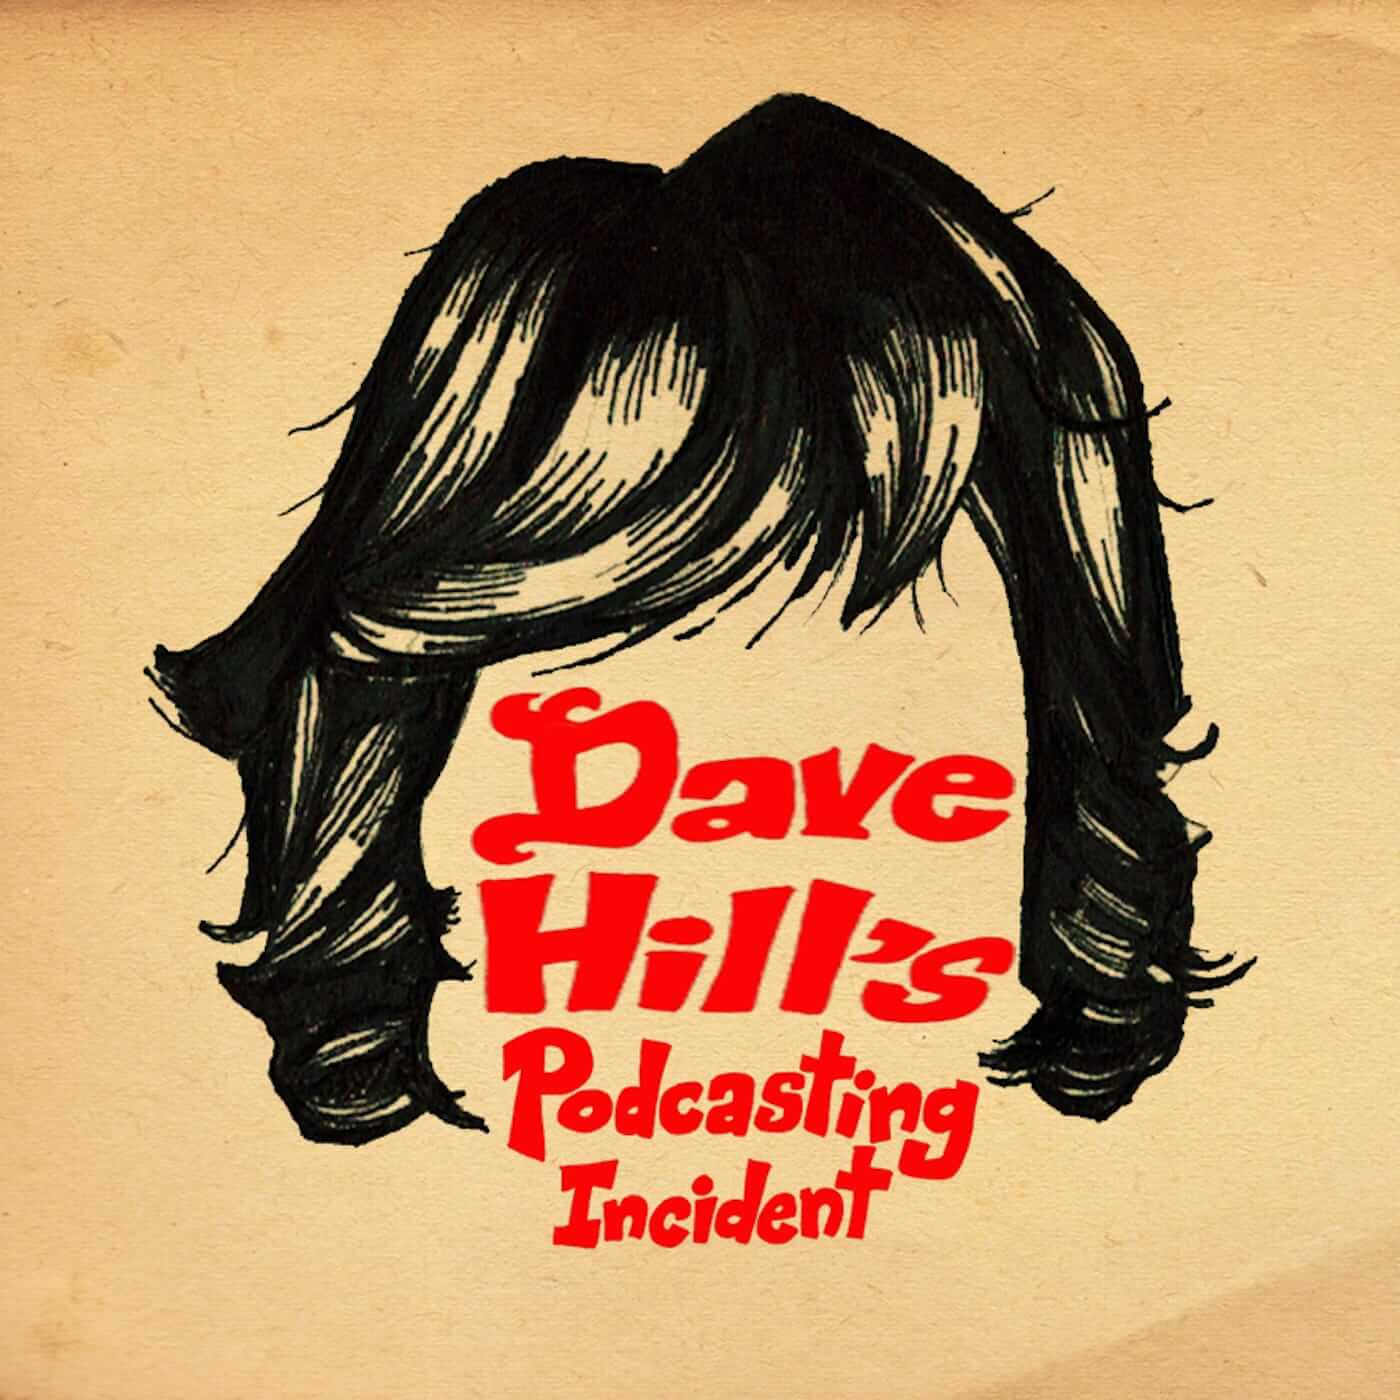 Dave Hill’s Podcasting Incident: A Podcast with Carefree Comedy